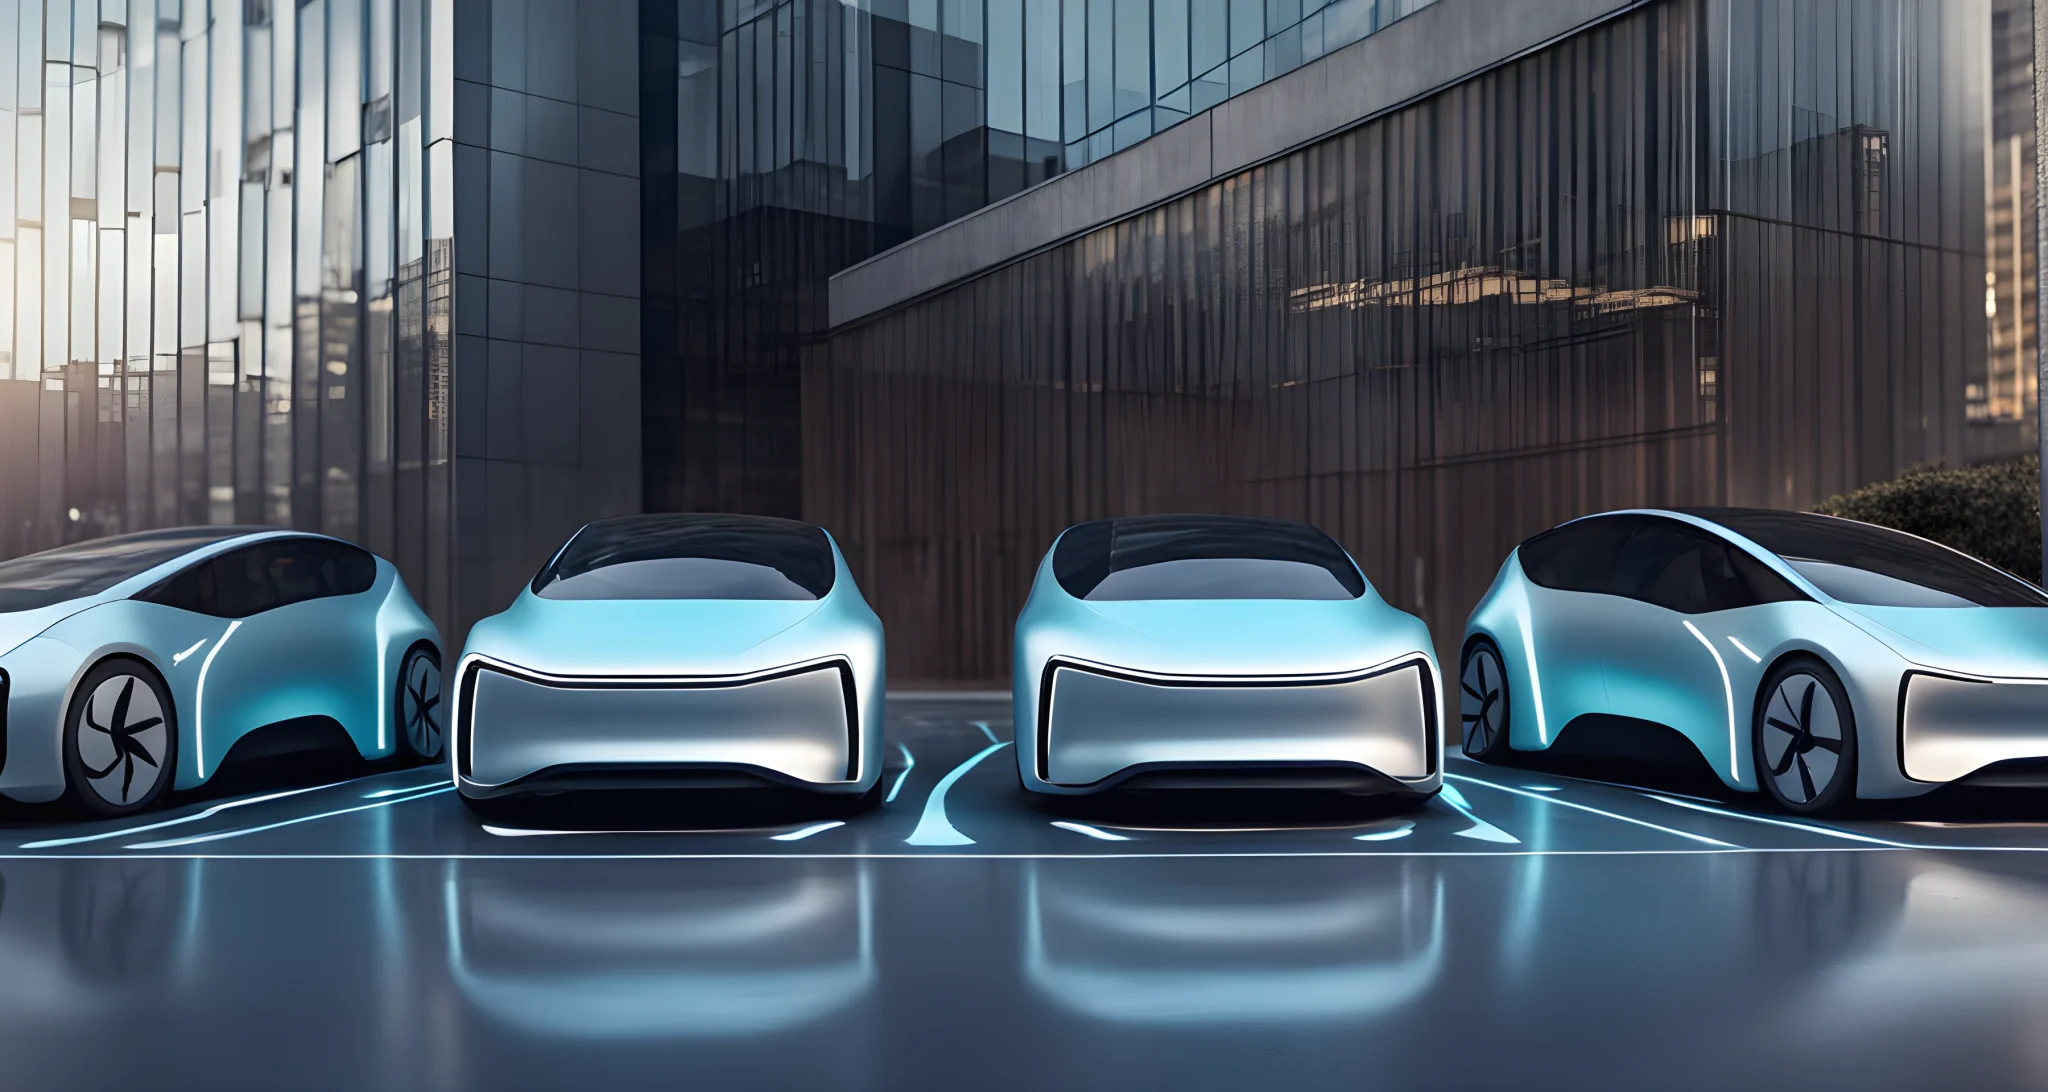 The image shows a row of sleek, futuristic electric vehicles parked at a charging station.